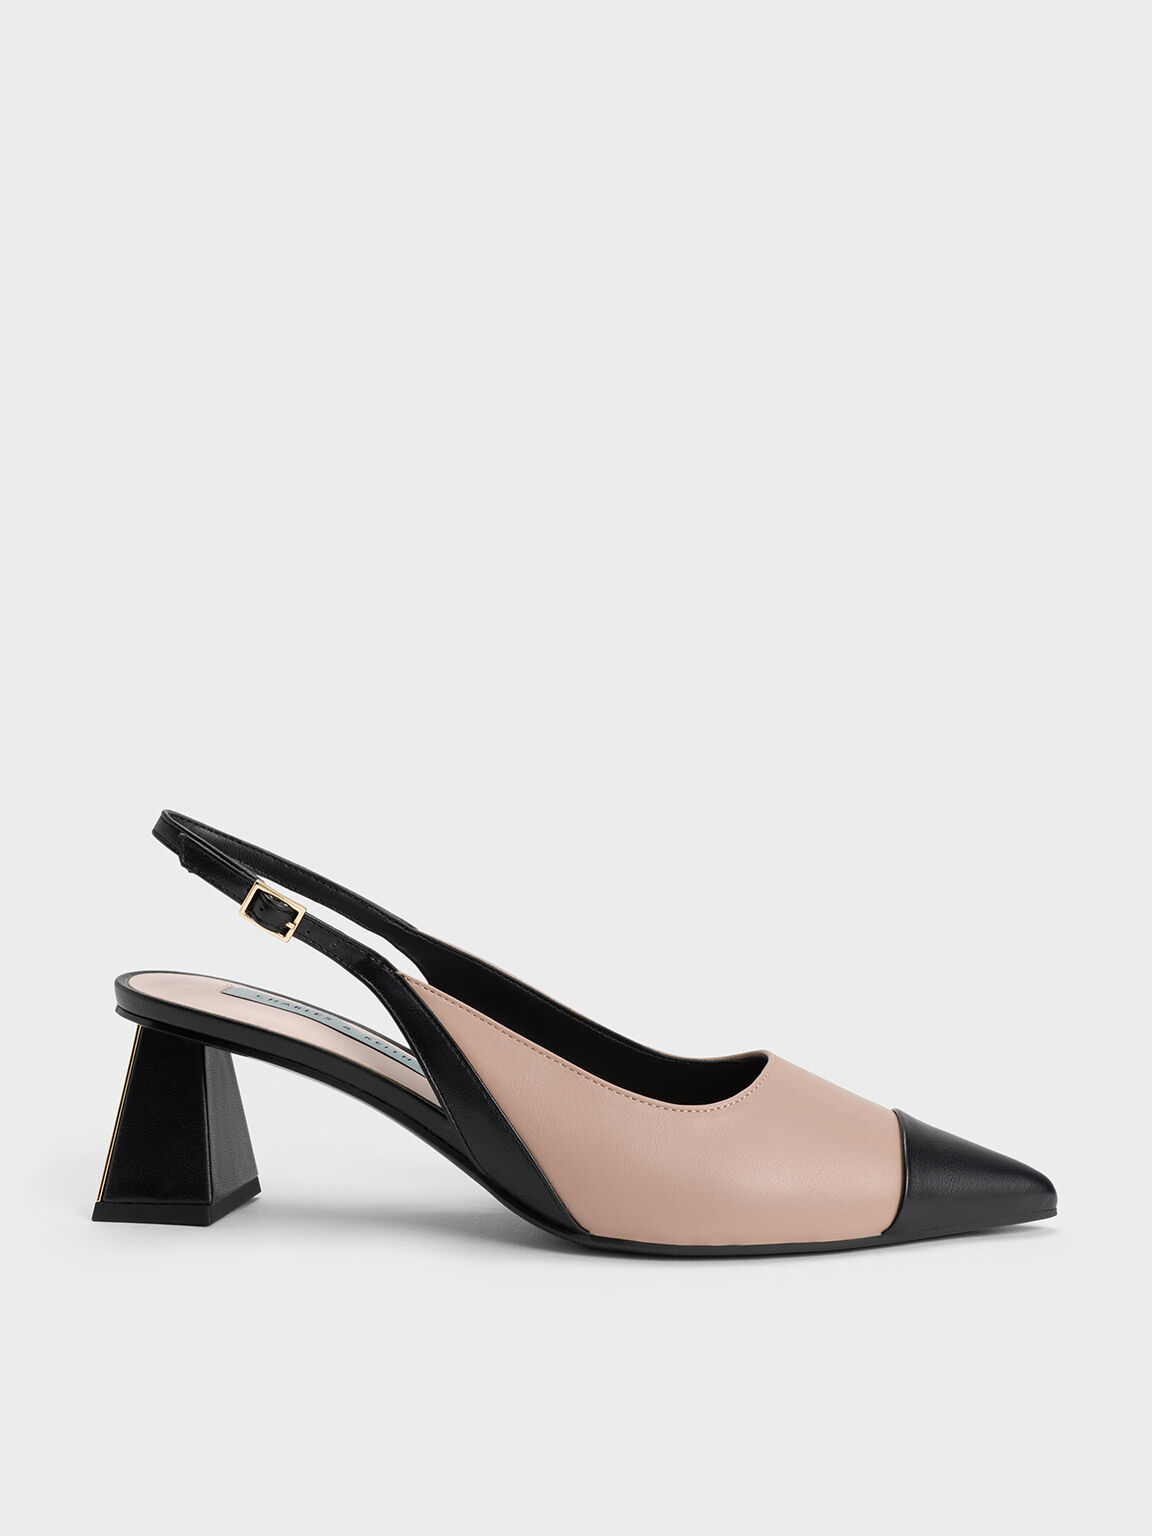 Beige Square-Toe Strappy Sandals - CHARLES & KEITH UK